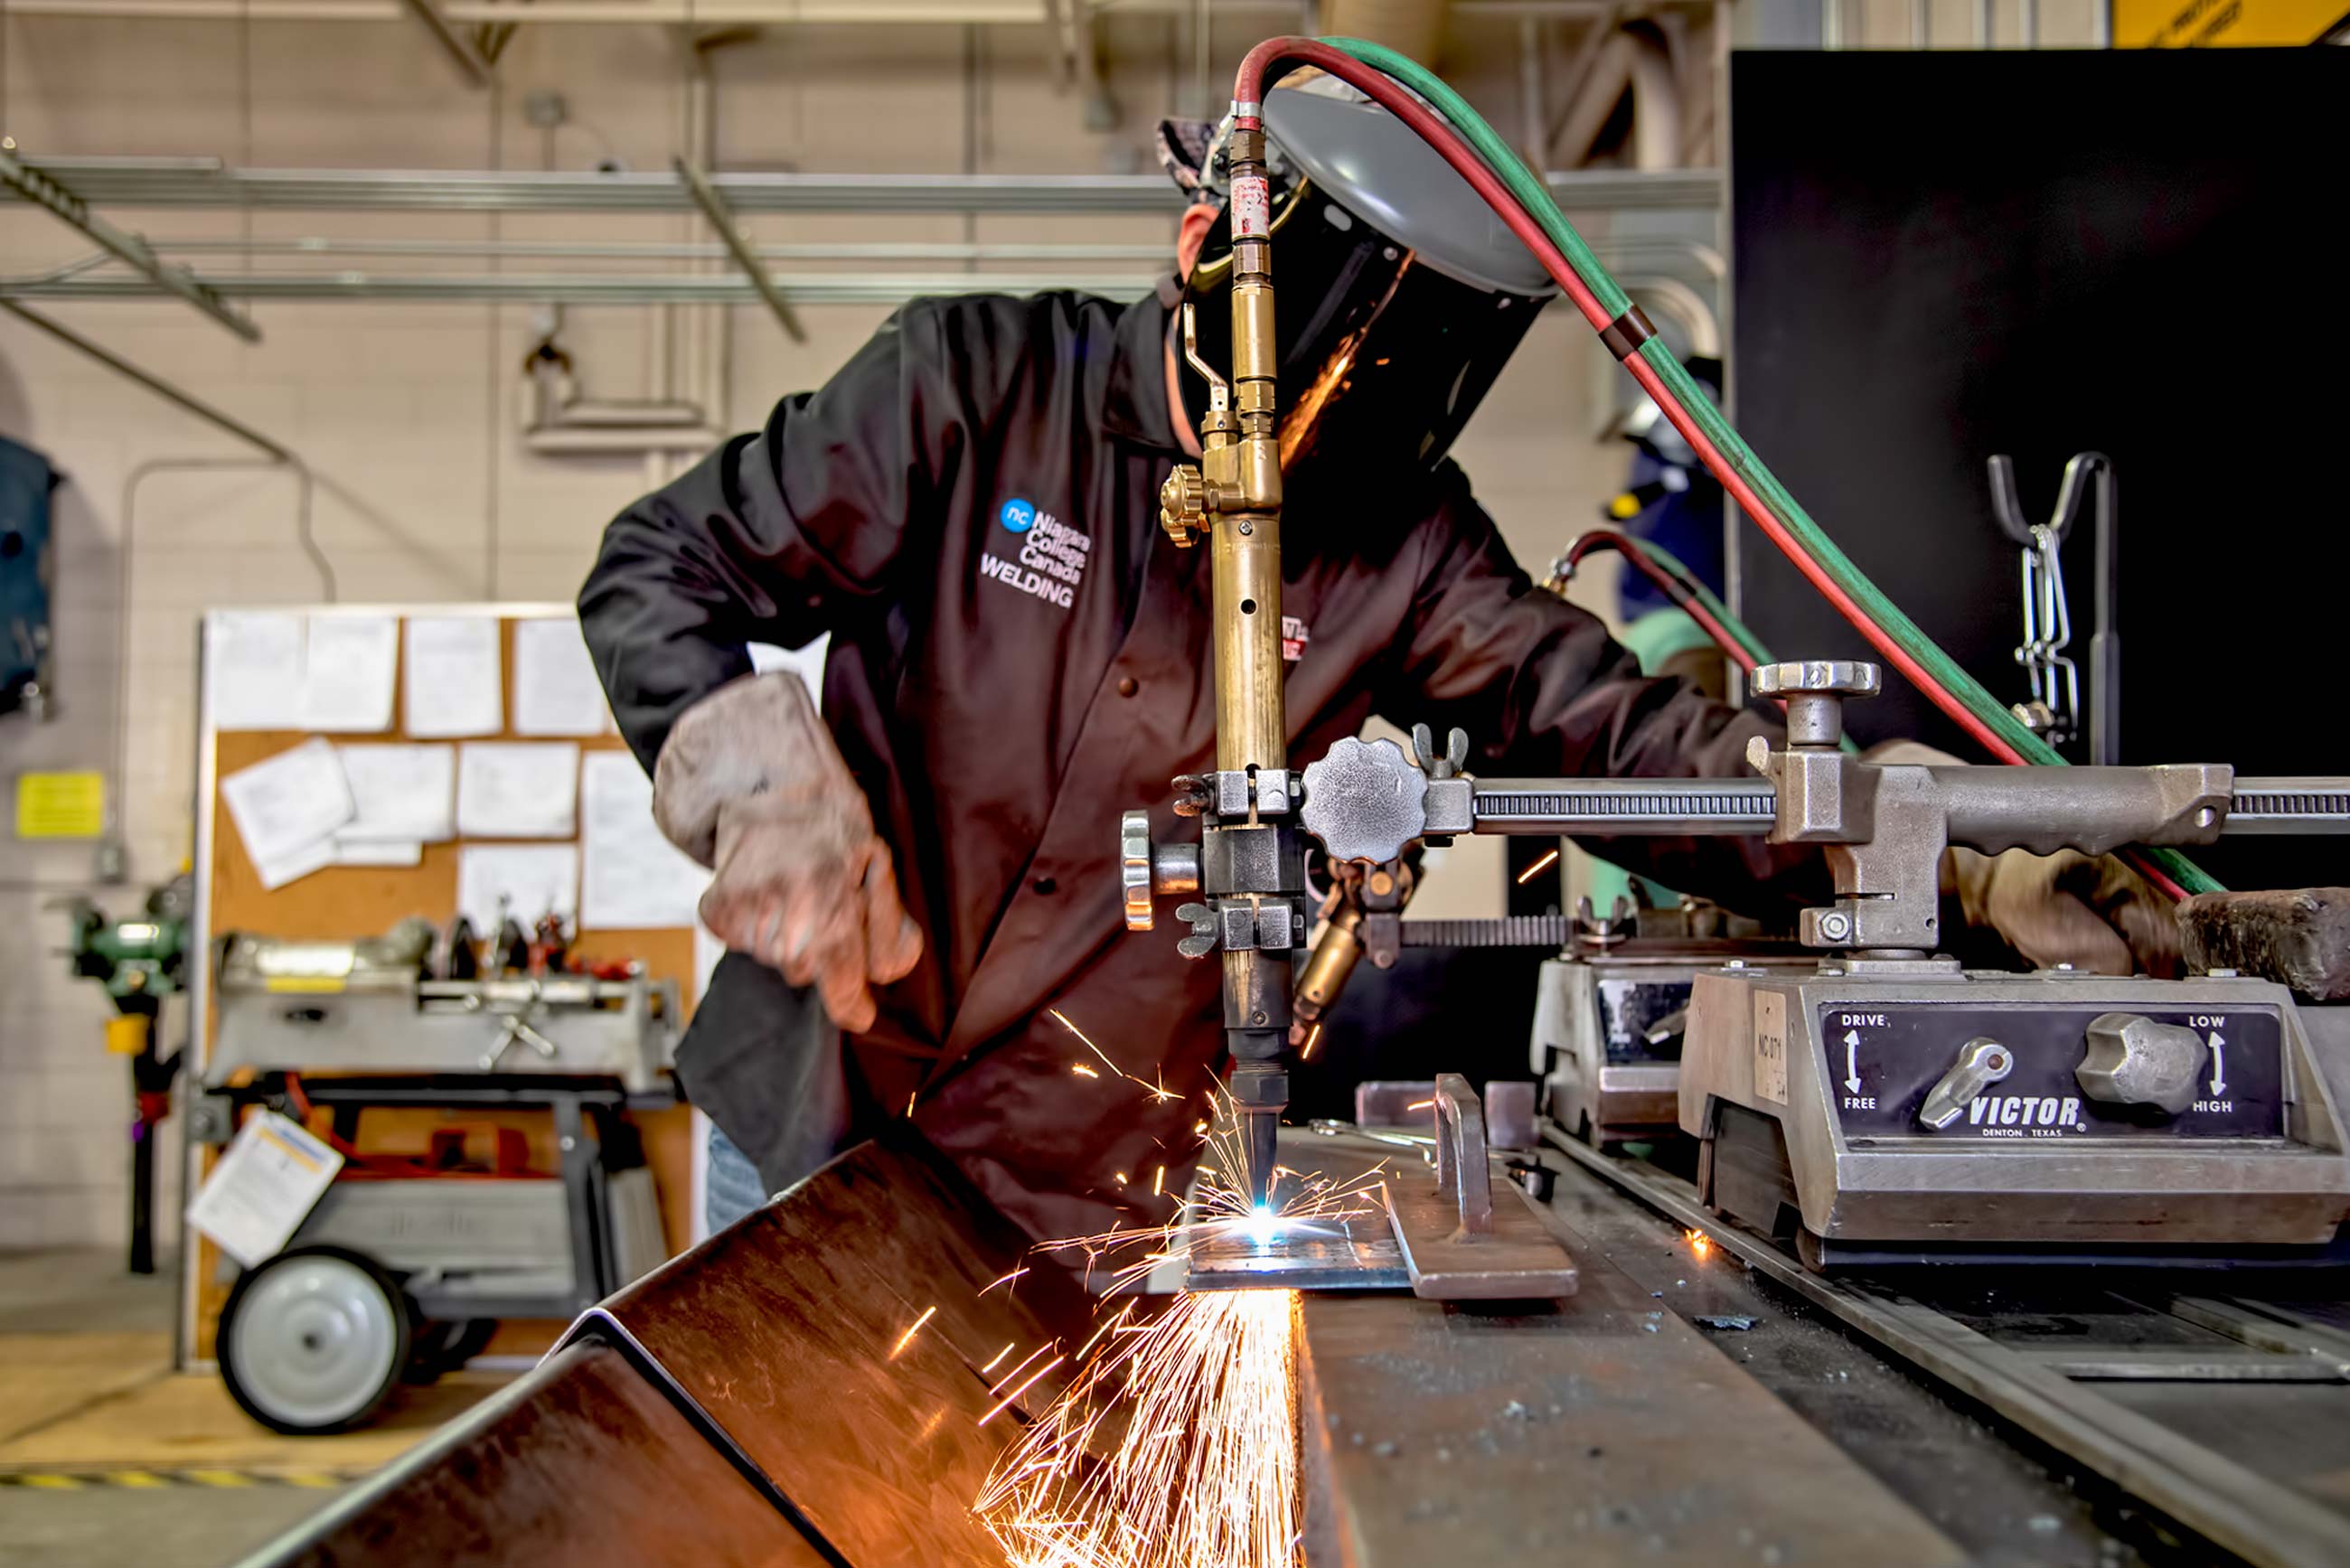 What does the technician need to learn the profession of welding?